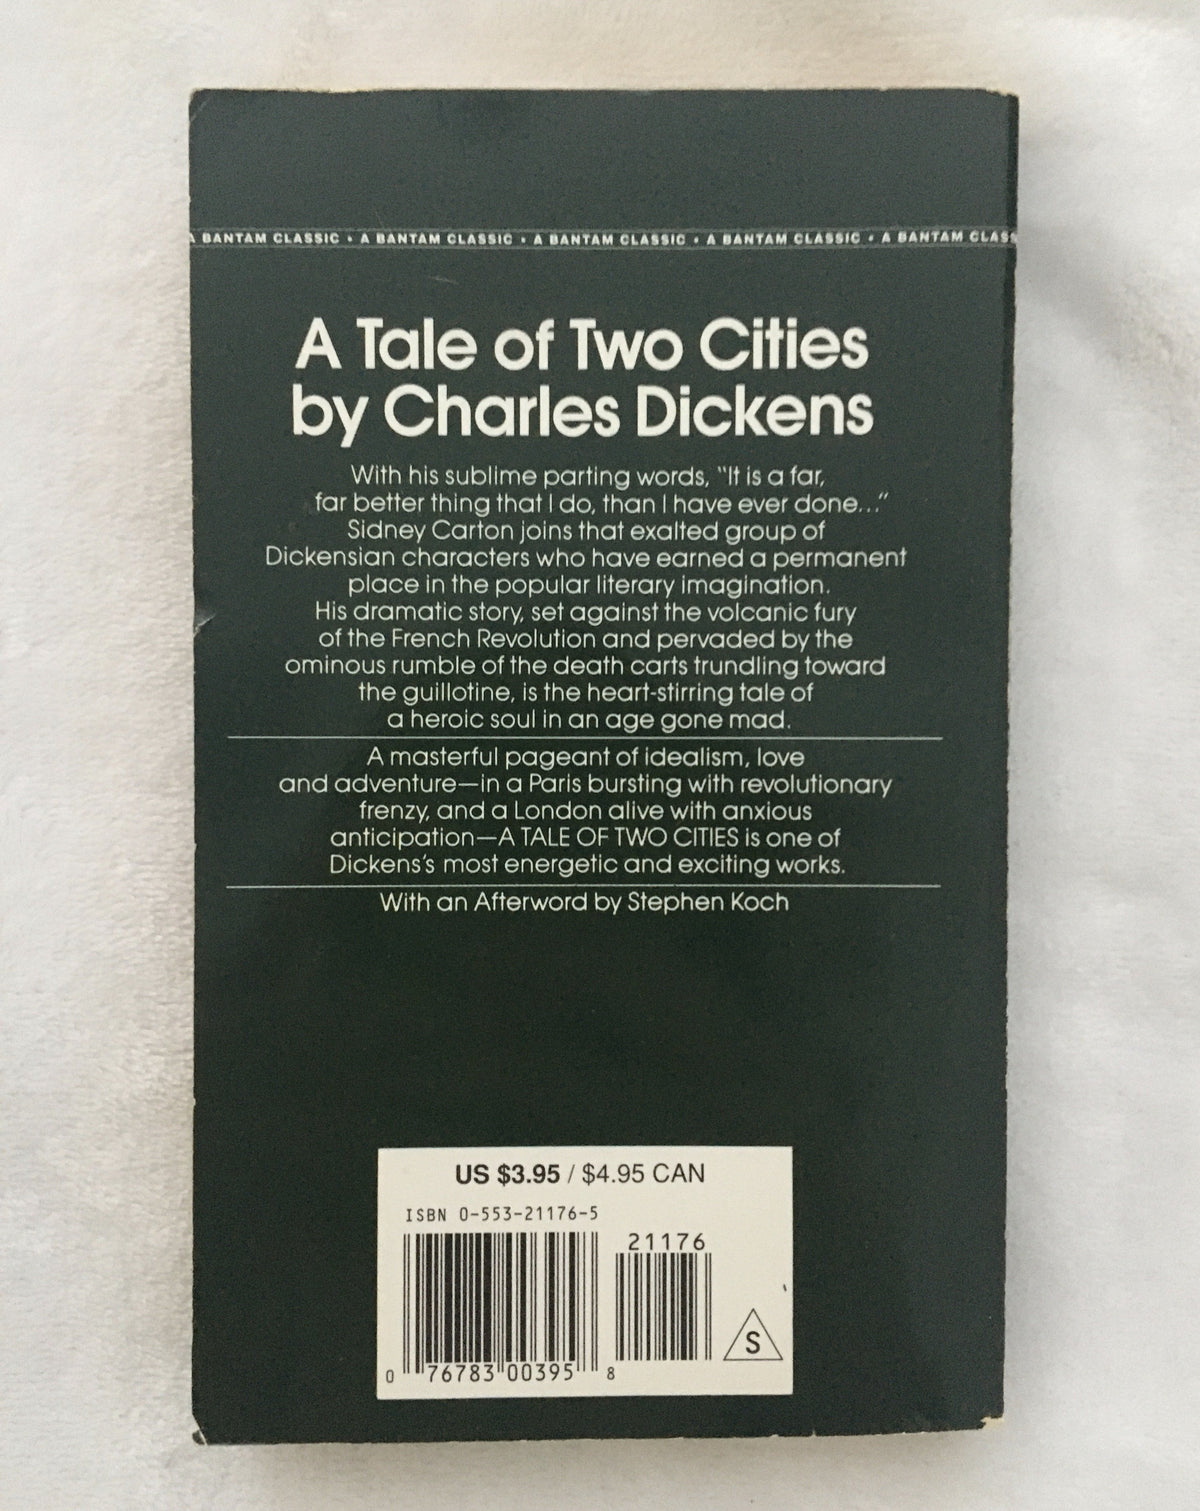 A Tale of Two Cities by Charles Dickens, book, Ten Dollar Books, Ten Dollar Books